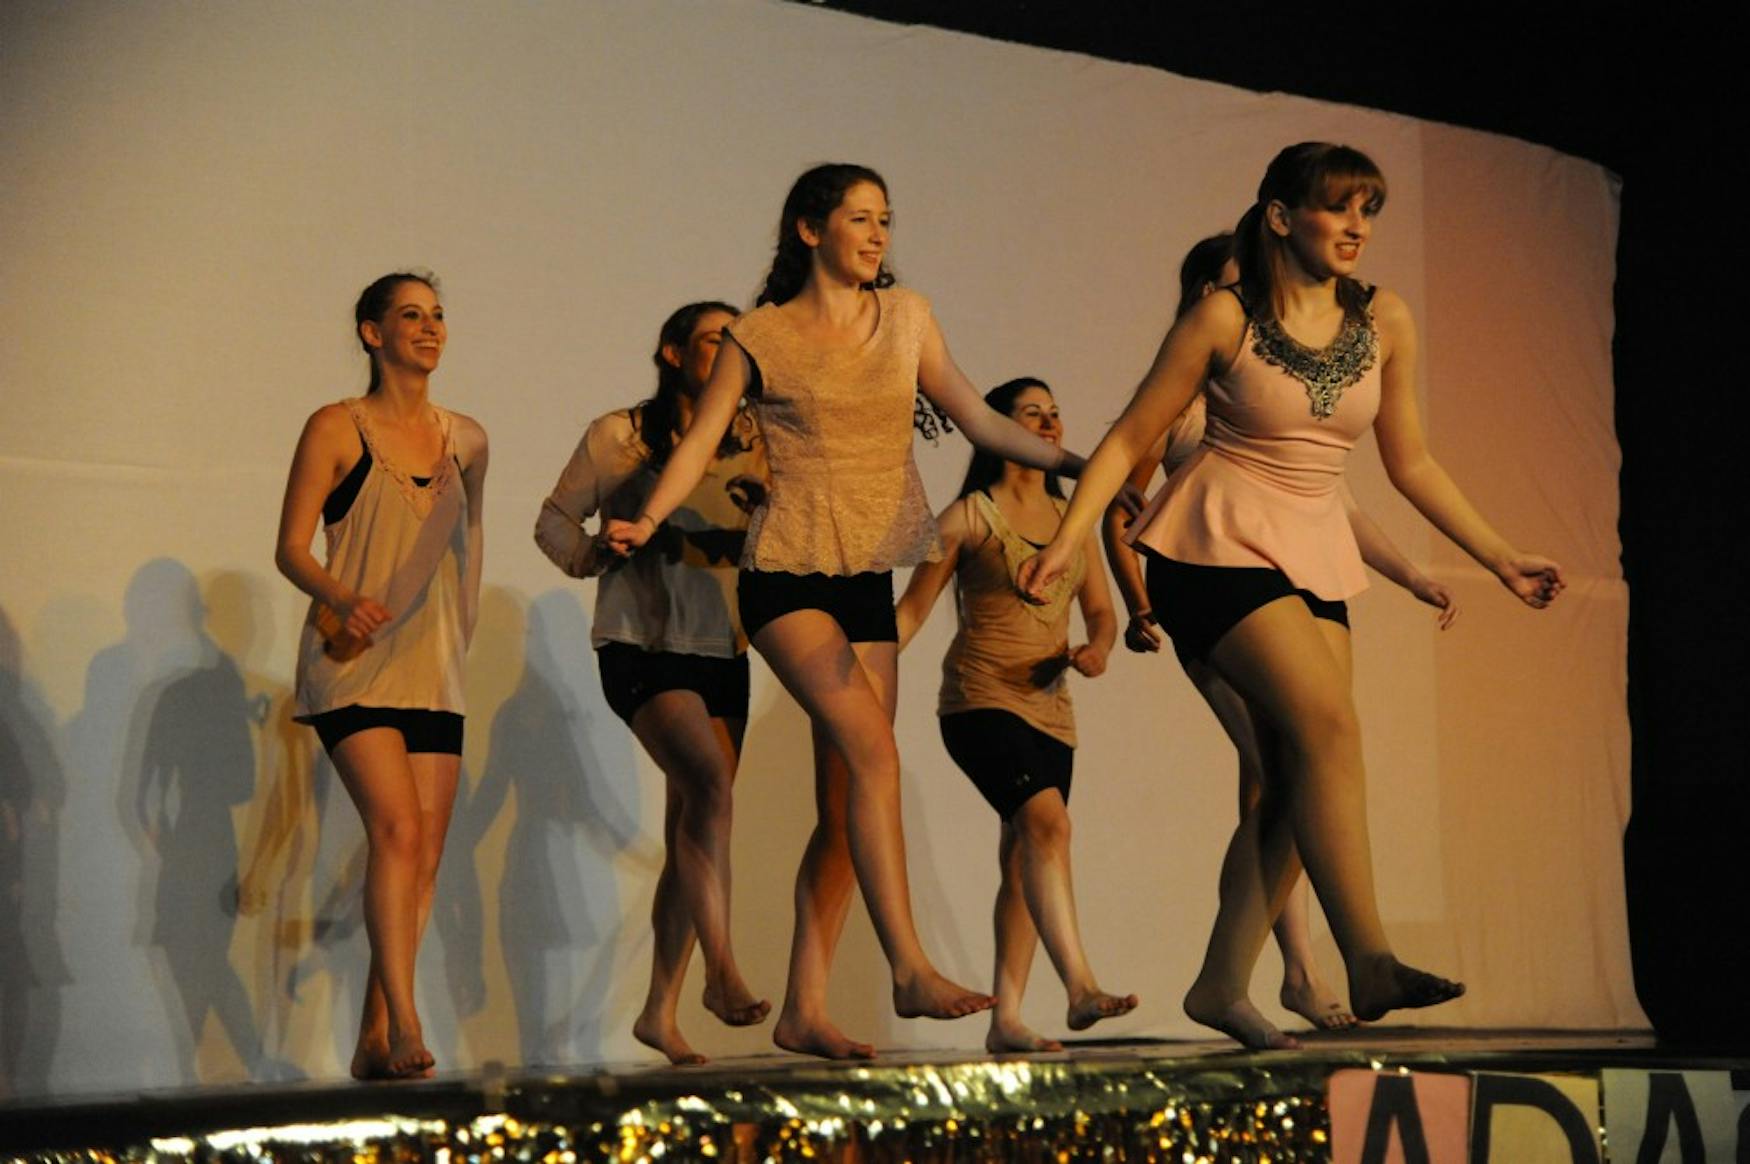 ALL TOGETHER NOW: “Time of My Life,” choreographed by Allison Lawsky ’15 focused on the group aspects of dance.